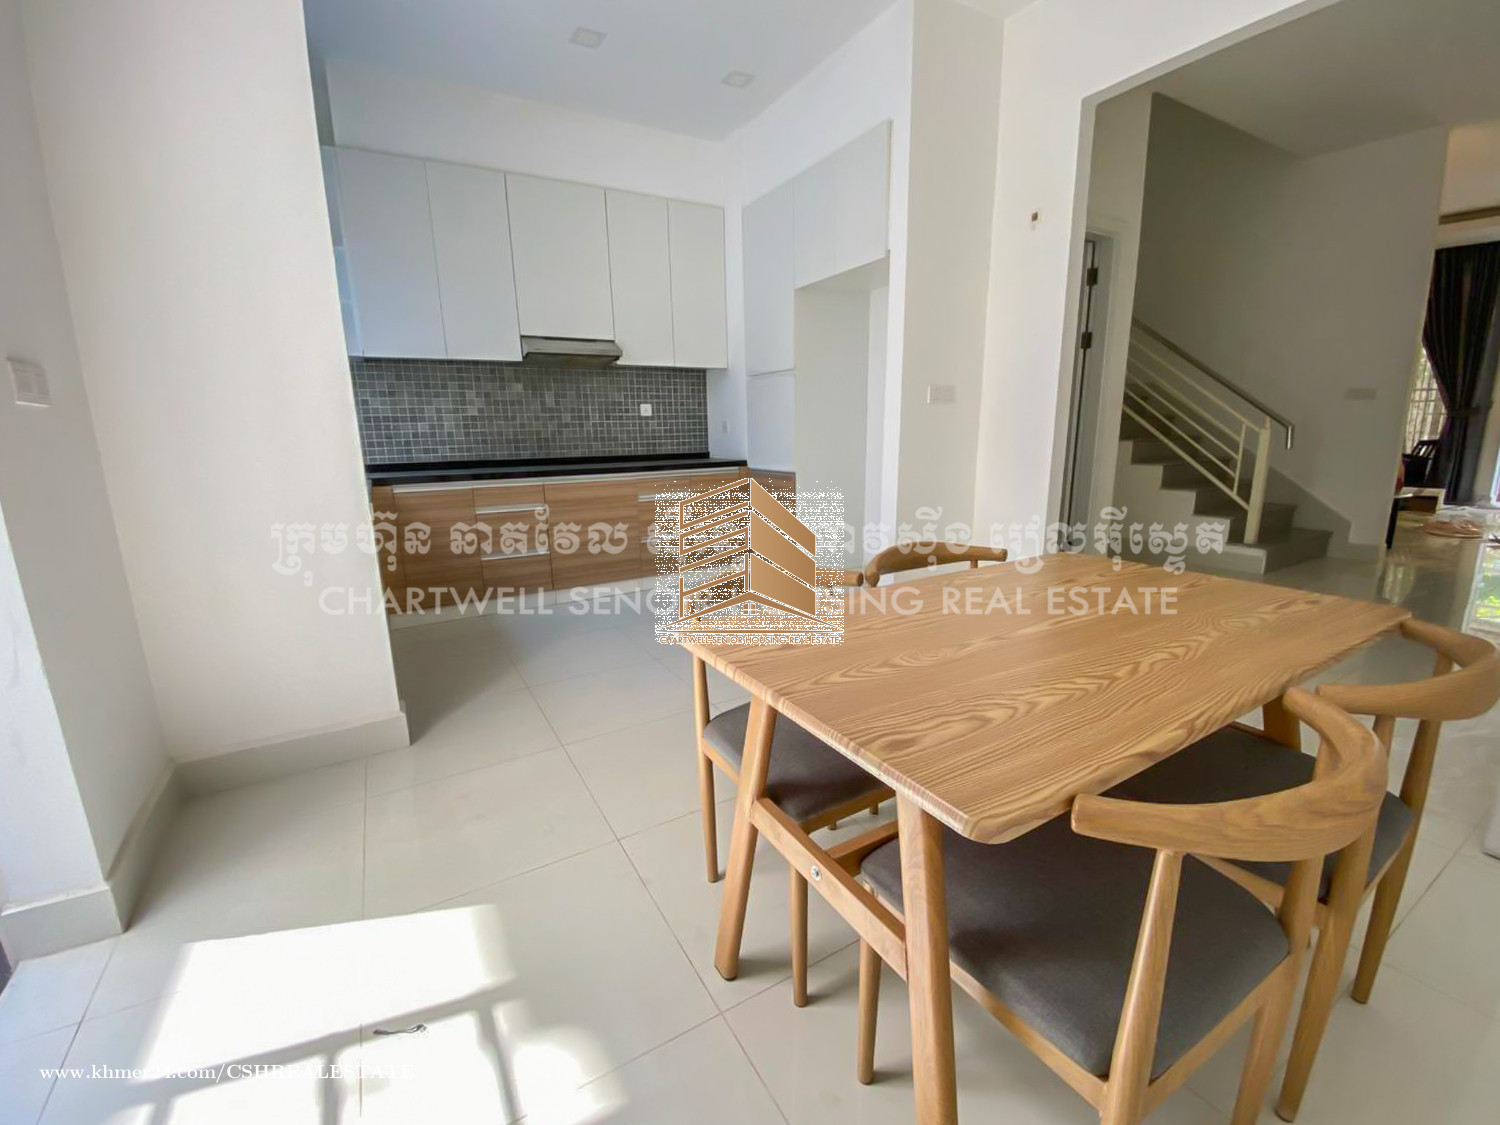 4 Bedrooms Link House for Rent in Borey Chip Mong Sen Sok (near Aeon Mall)